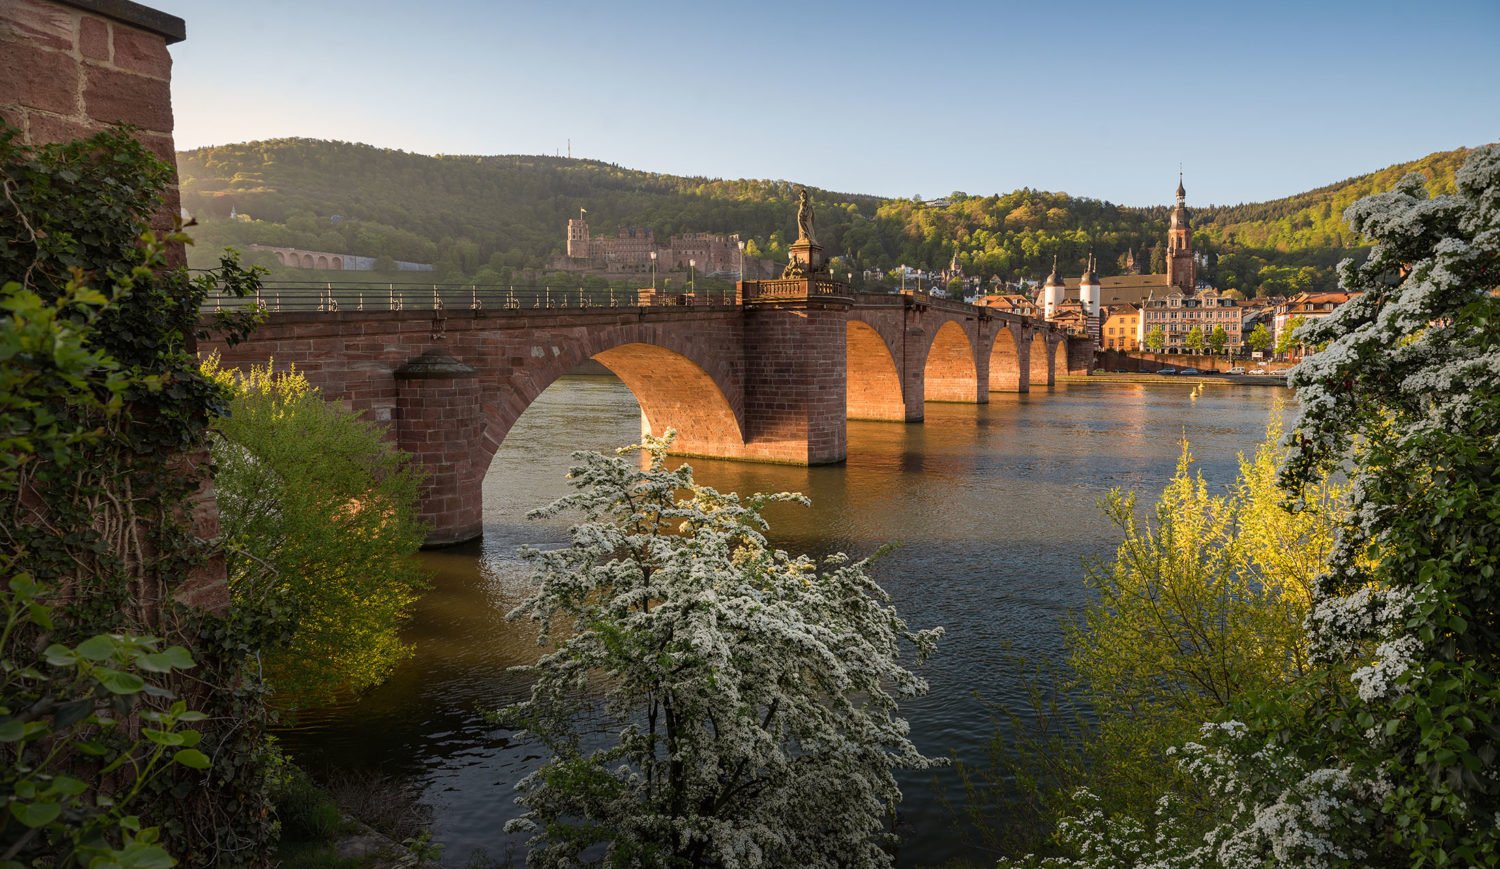 The Old Bridge connects the Old Town with the opposite bank of the Neckar River - like eight predecessor buildings in the past centuries.